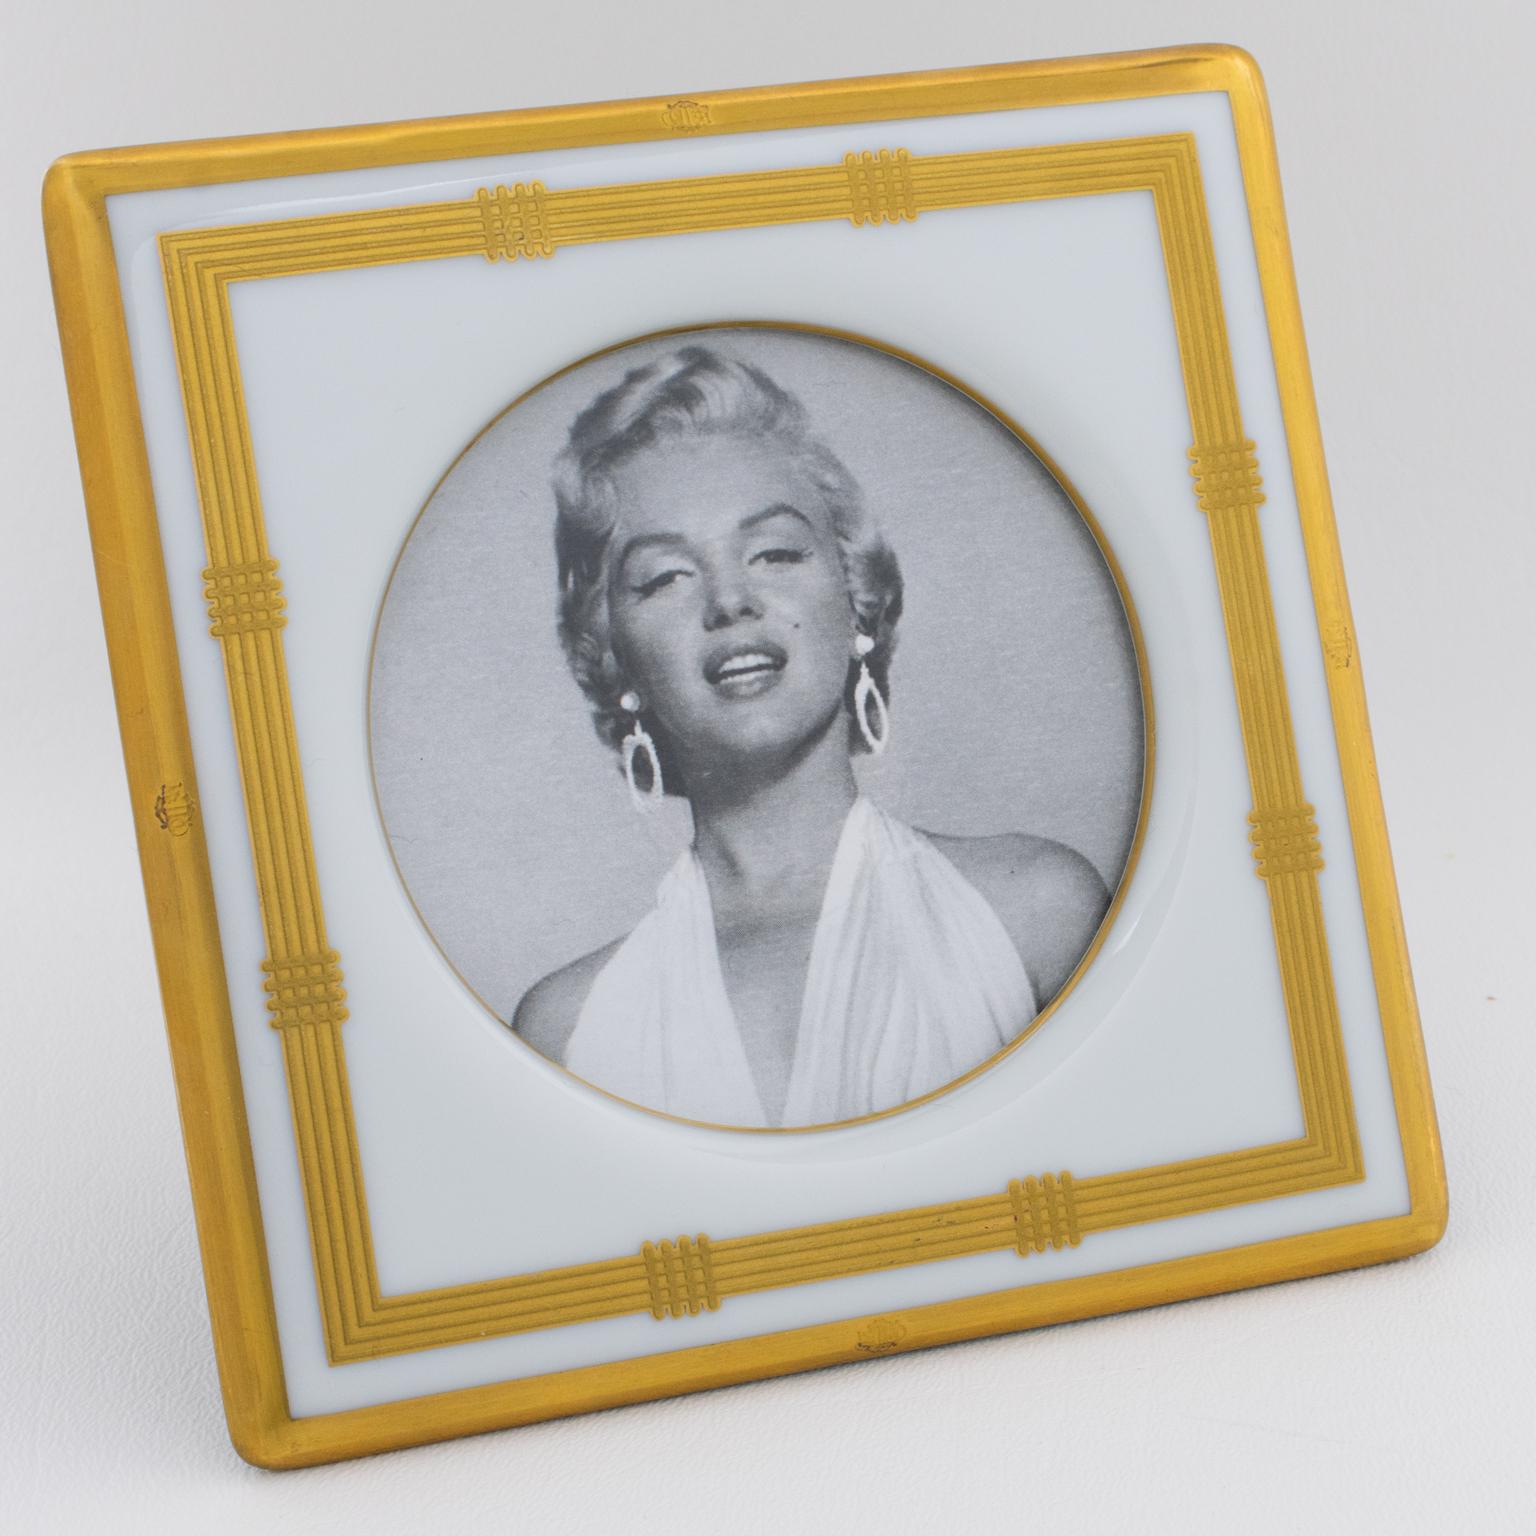 This stunning Christian Dior Paris white and gilded ceramic picture frame is a rare piece from the 1980s Dior Home Collection. Crafted from delicate white ceramic with a beautiful gold application, it features felted black fabric for the easel and